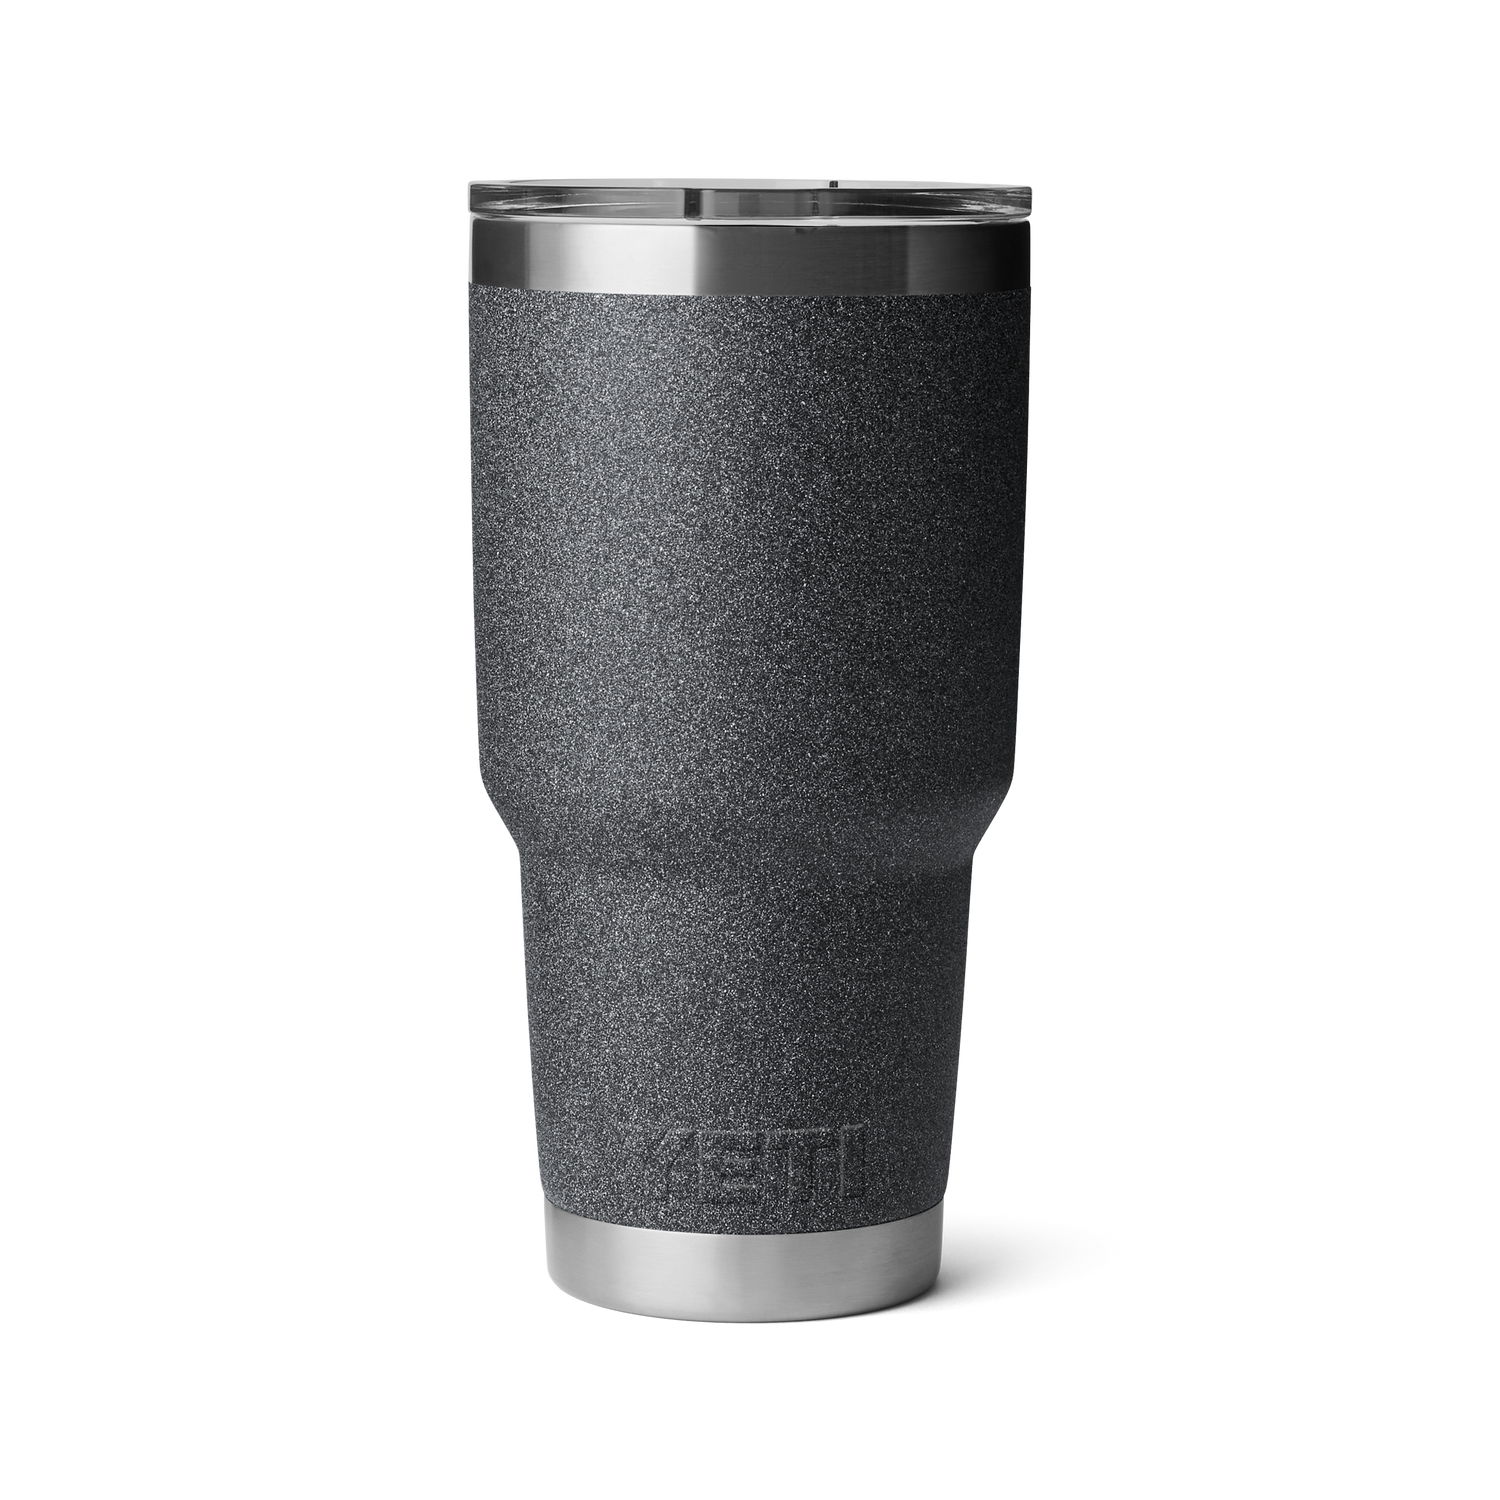 40 Oz. RTIC TUMBLER Personalized With Laser Engraved Name -  Finland